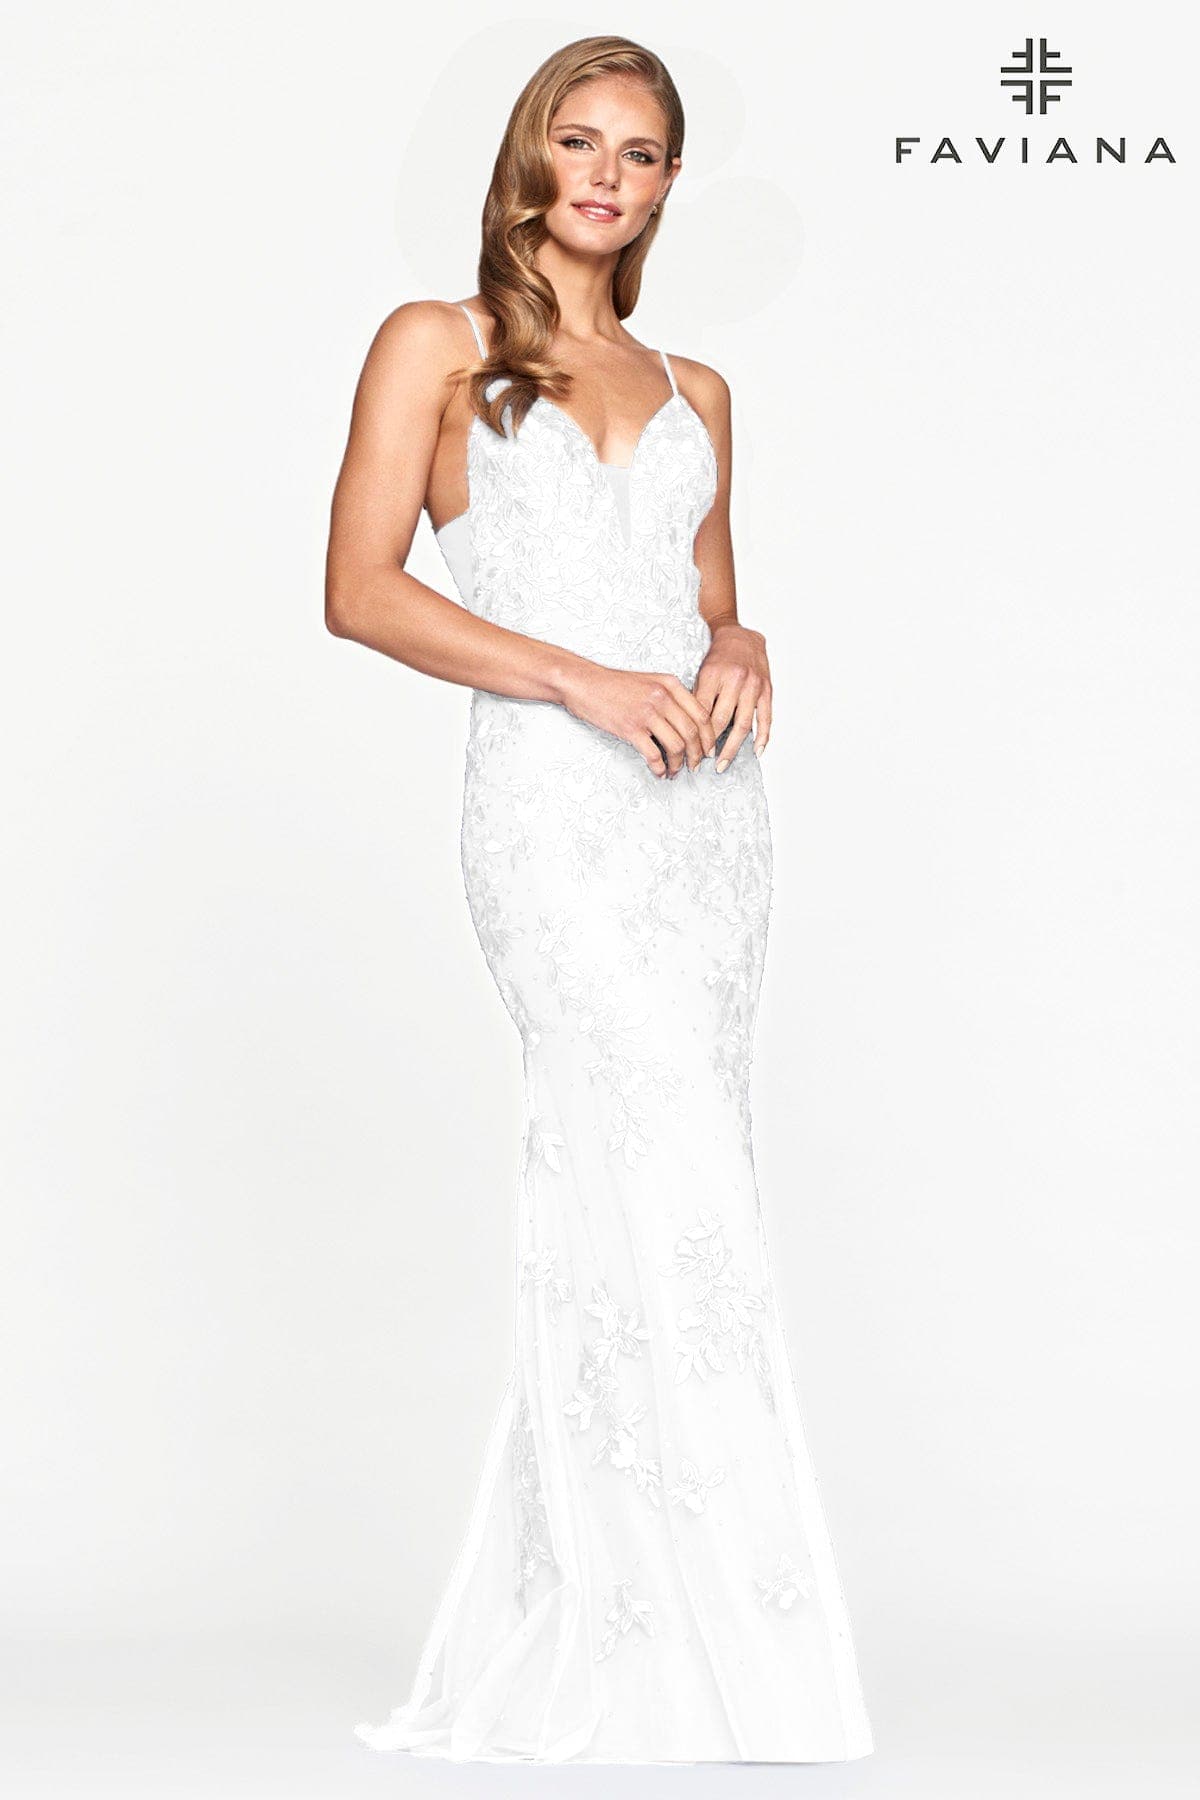 Lace Prom Dress With Deep V Neckline